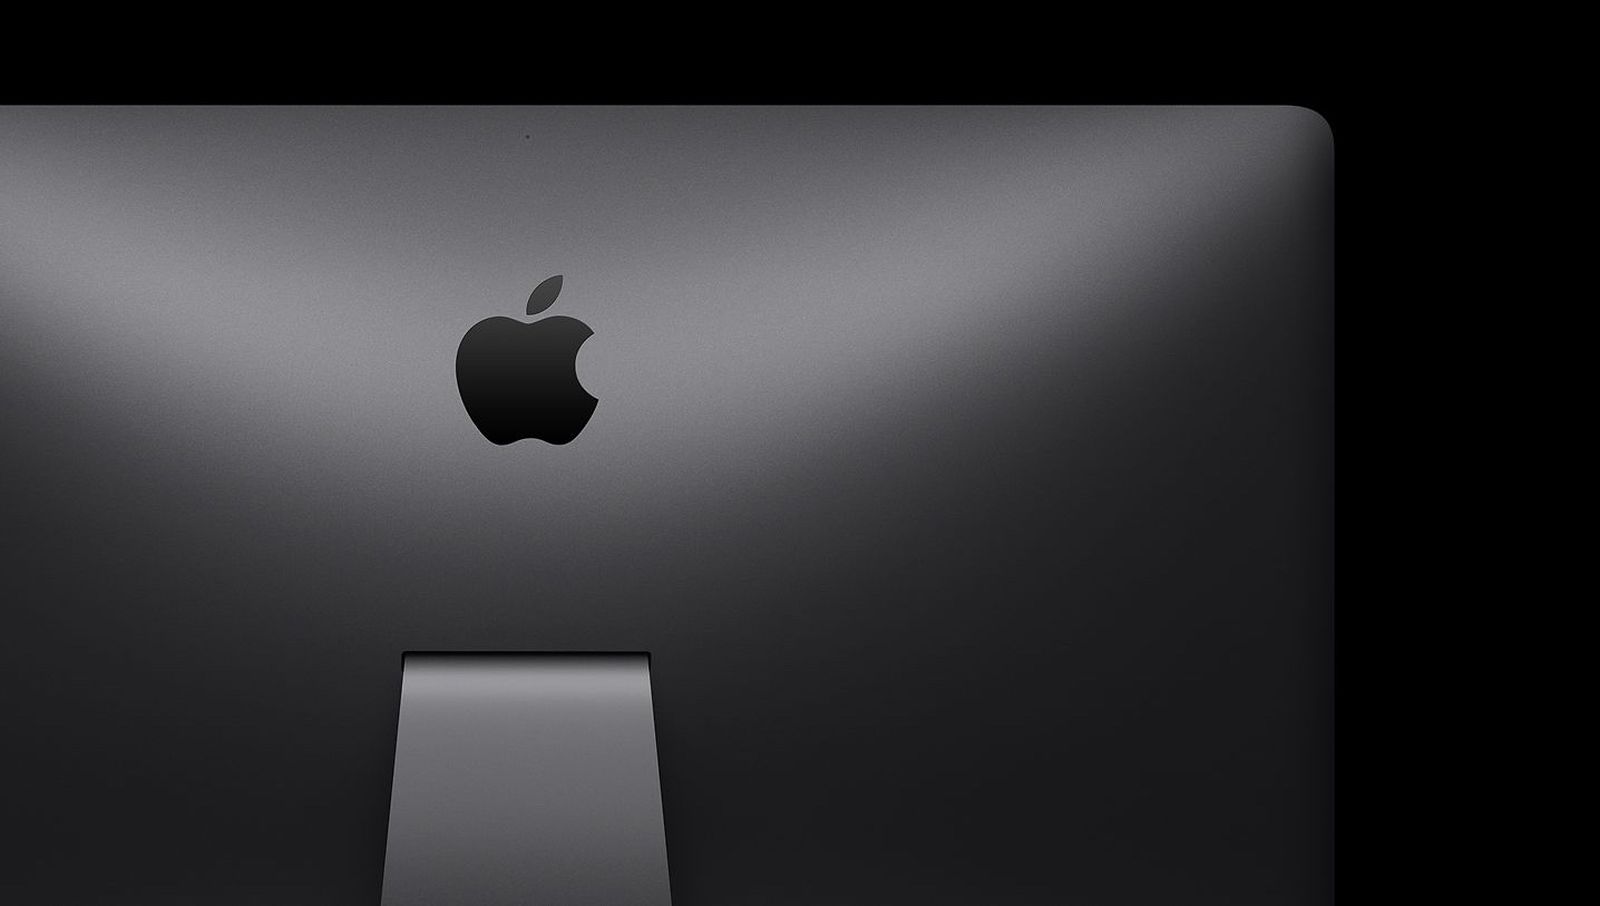 Apple confirms that iMac Pro will be discontinued if stocks run out, recommends 27-inch iMac